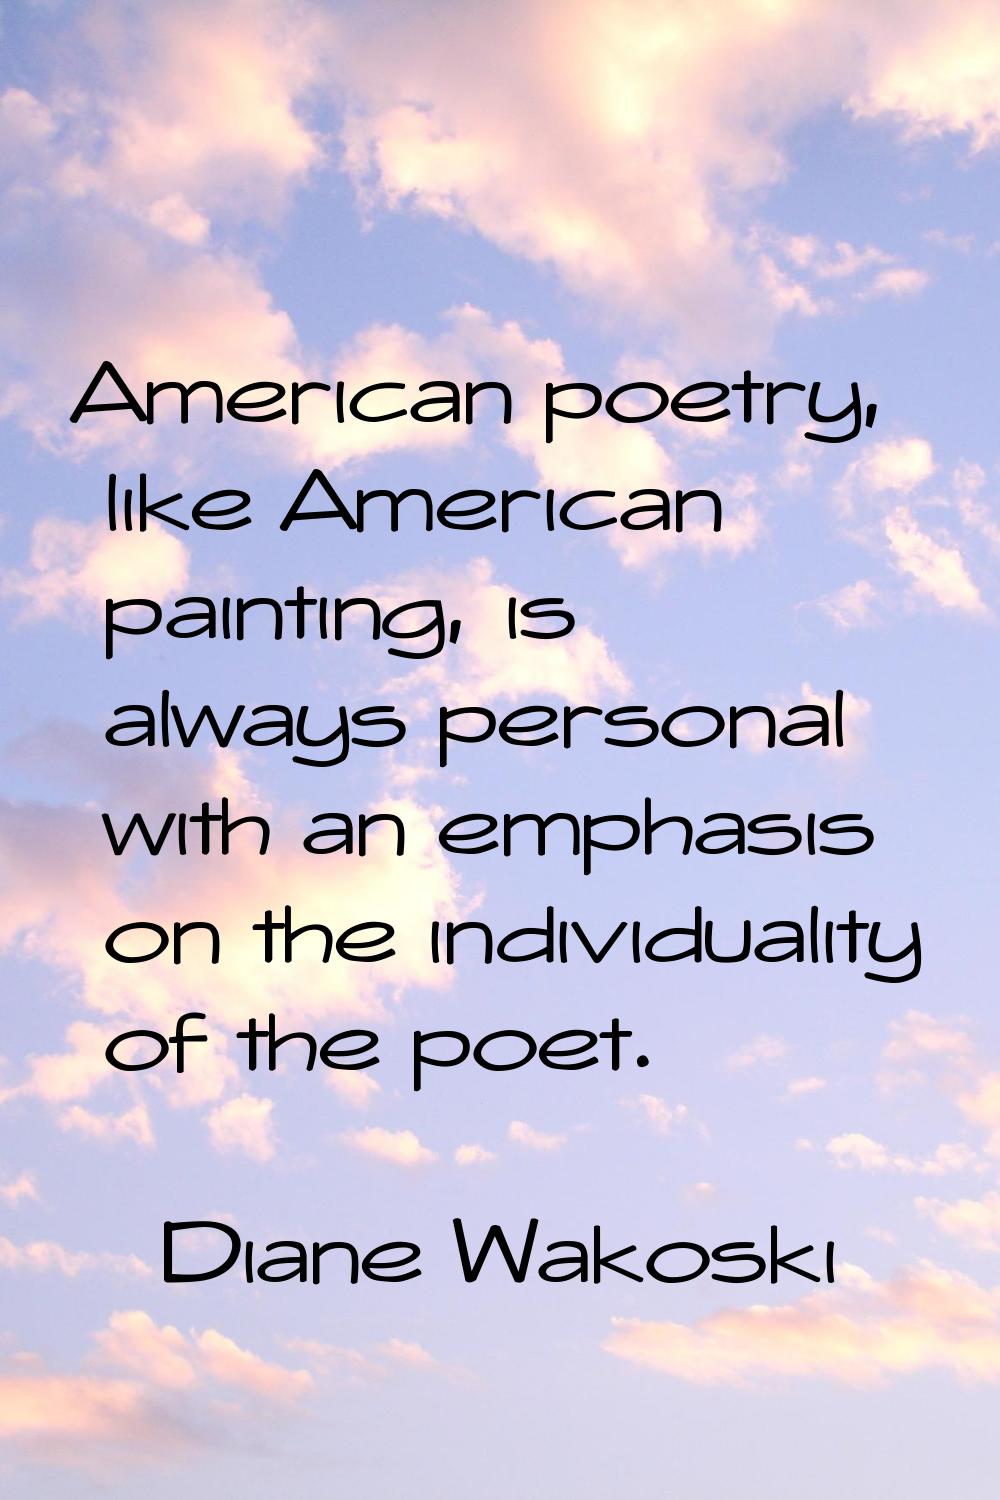 American poetry, like American painting, is always personal with an emphasis on the individuality o